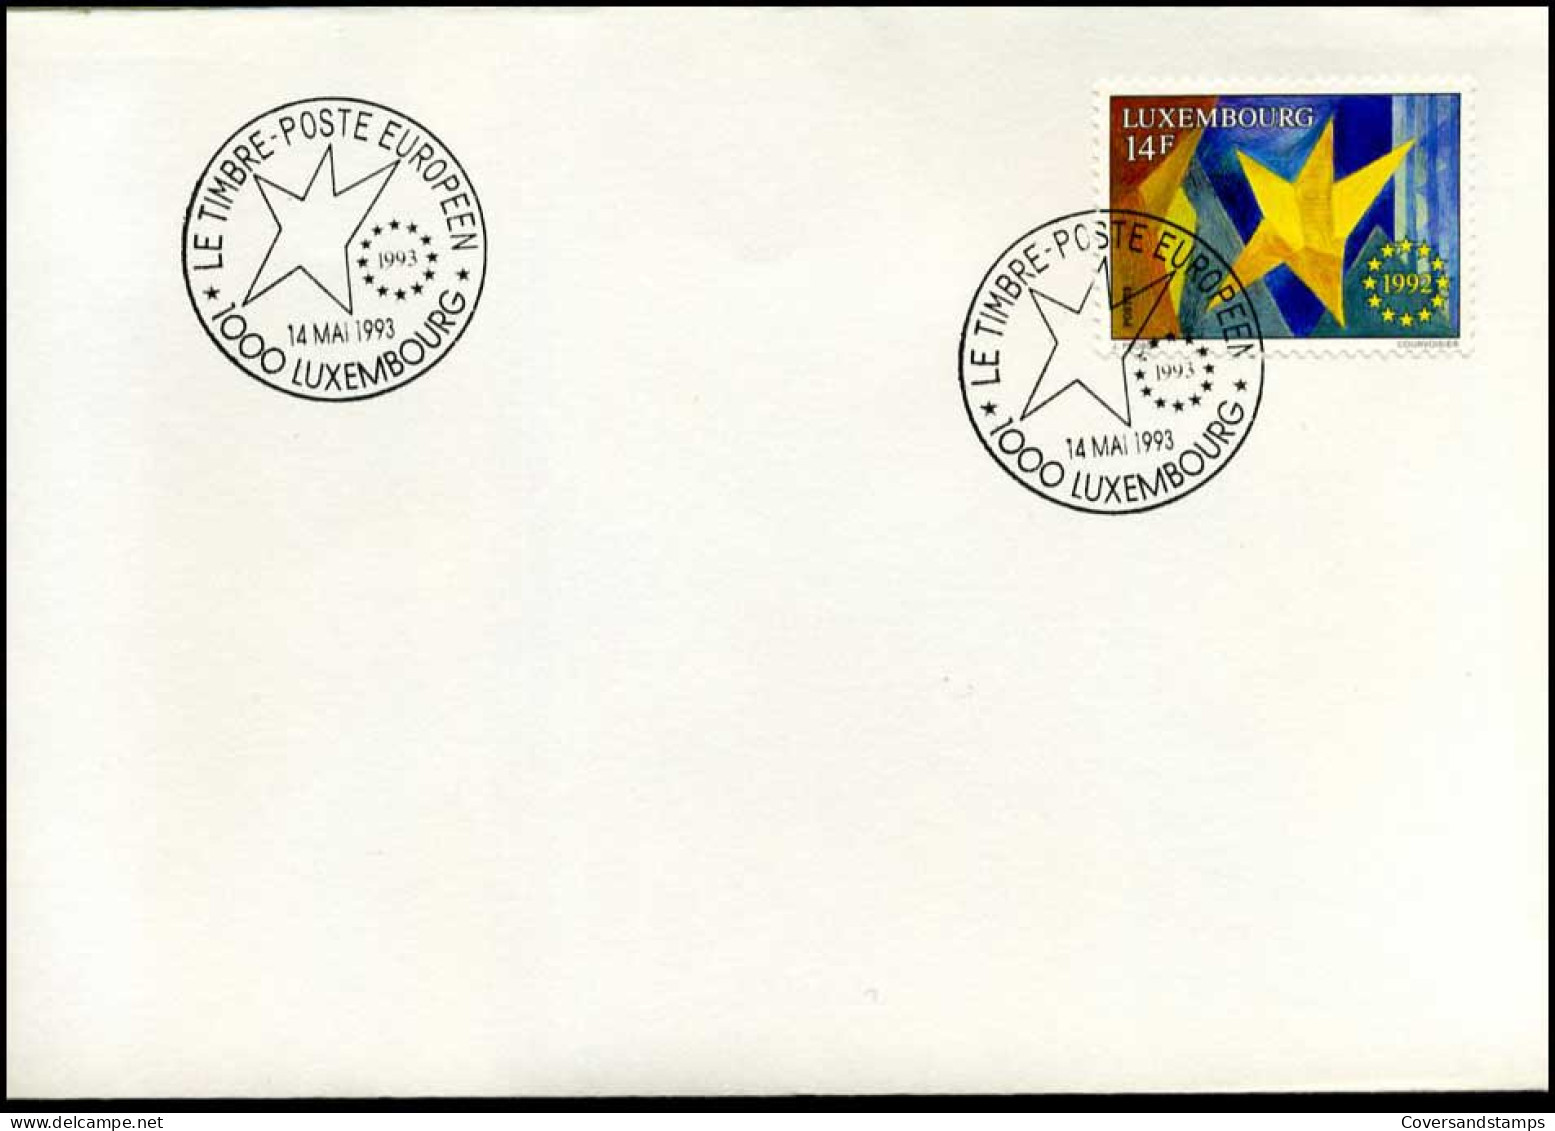 Luxembourg - FDC -  Europa 1992 - FDC